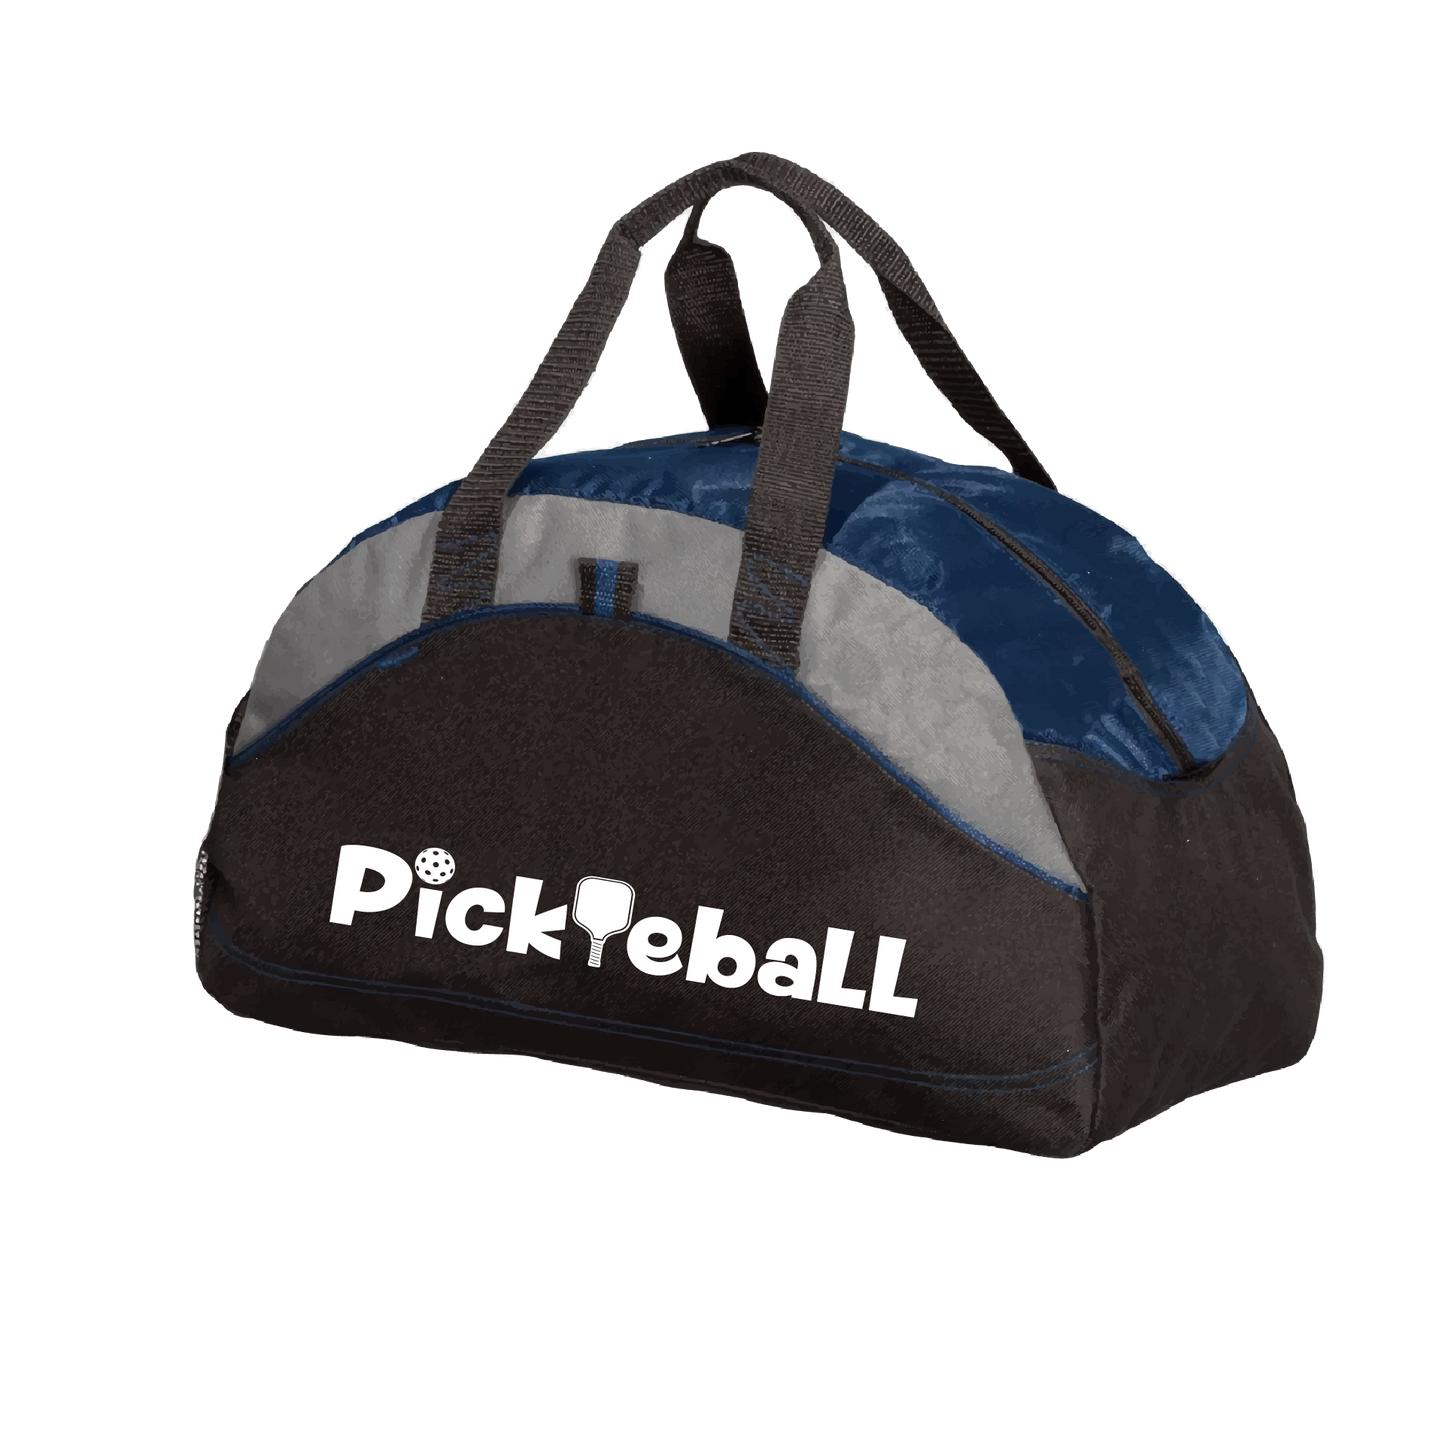 Pickleball Design: Pickleball  Carry your gear in comfort and style. This fun pickleball duffel bag is the perfect accessory for all pickleball players needing to keep their gear in one place. This medium sized duffel tote is ideal for all your pickleball activities. The large center compartment allows for plenty of space and the mesh end pocket is perfect for holding a water bottle.